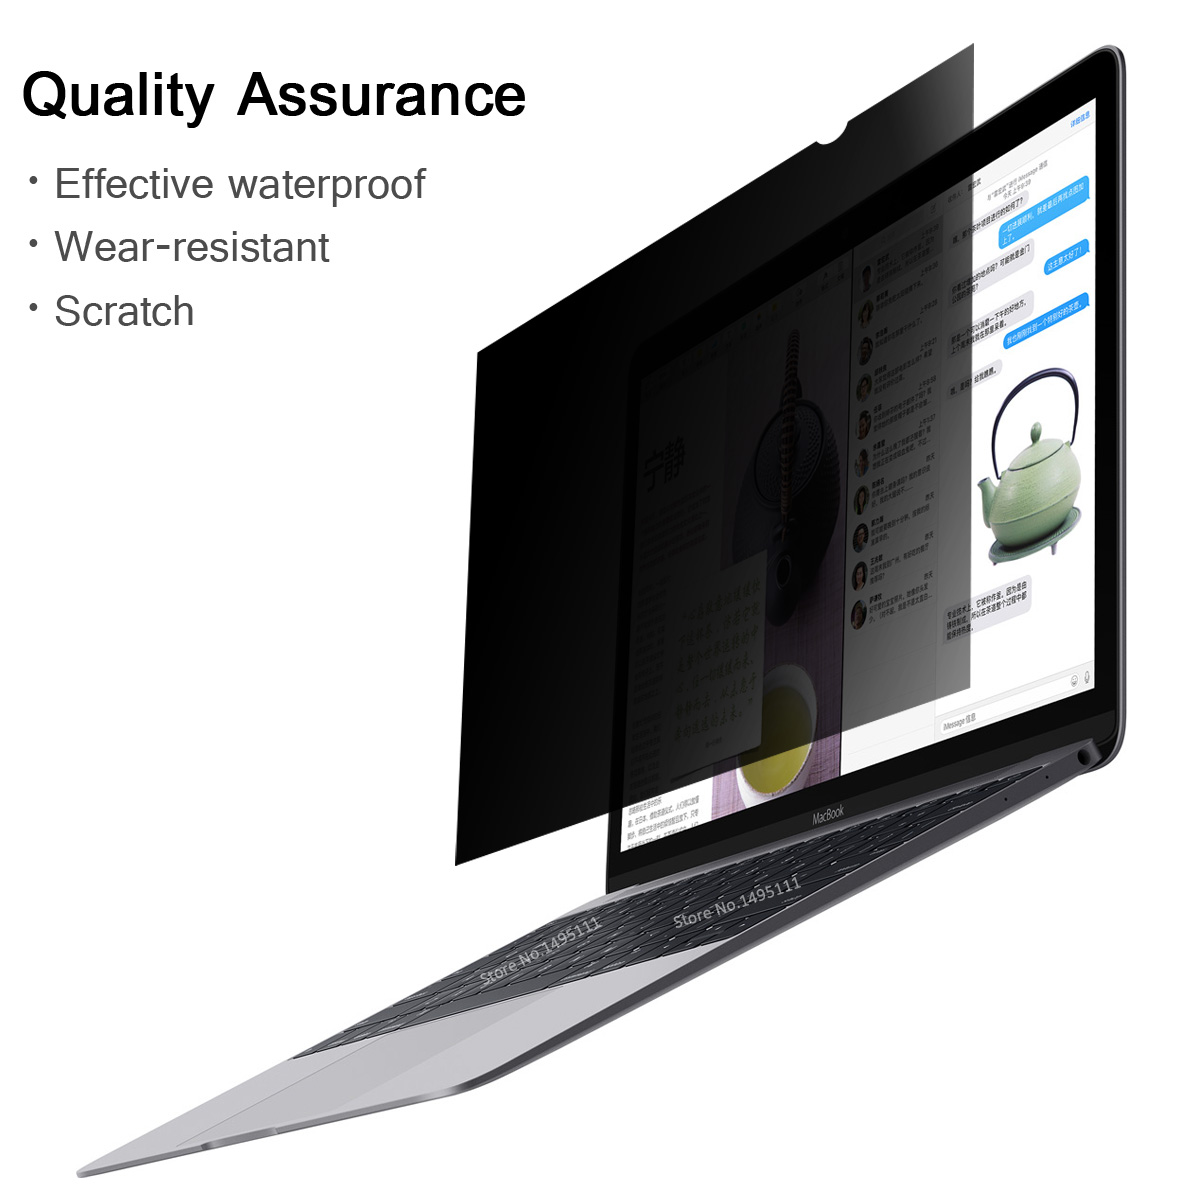 23 inch (509mm*286mm) Privacy Filter Anti-Glare LCD Screen Protective film For 16:9 Widescreen Computer Notebook PC Monitors